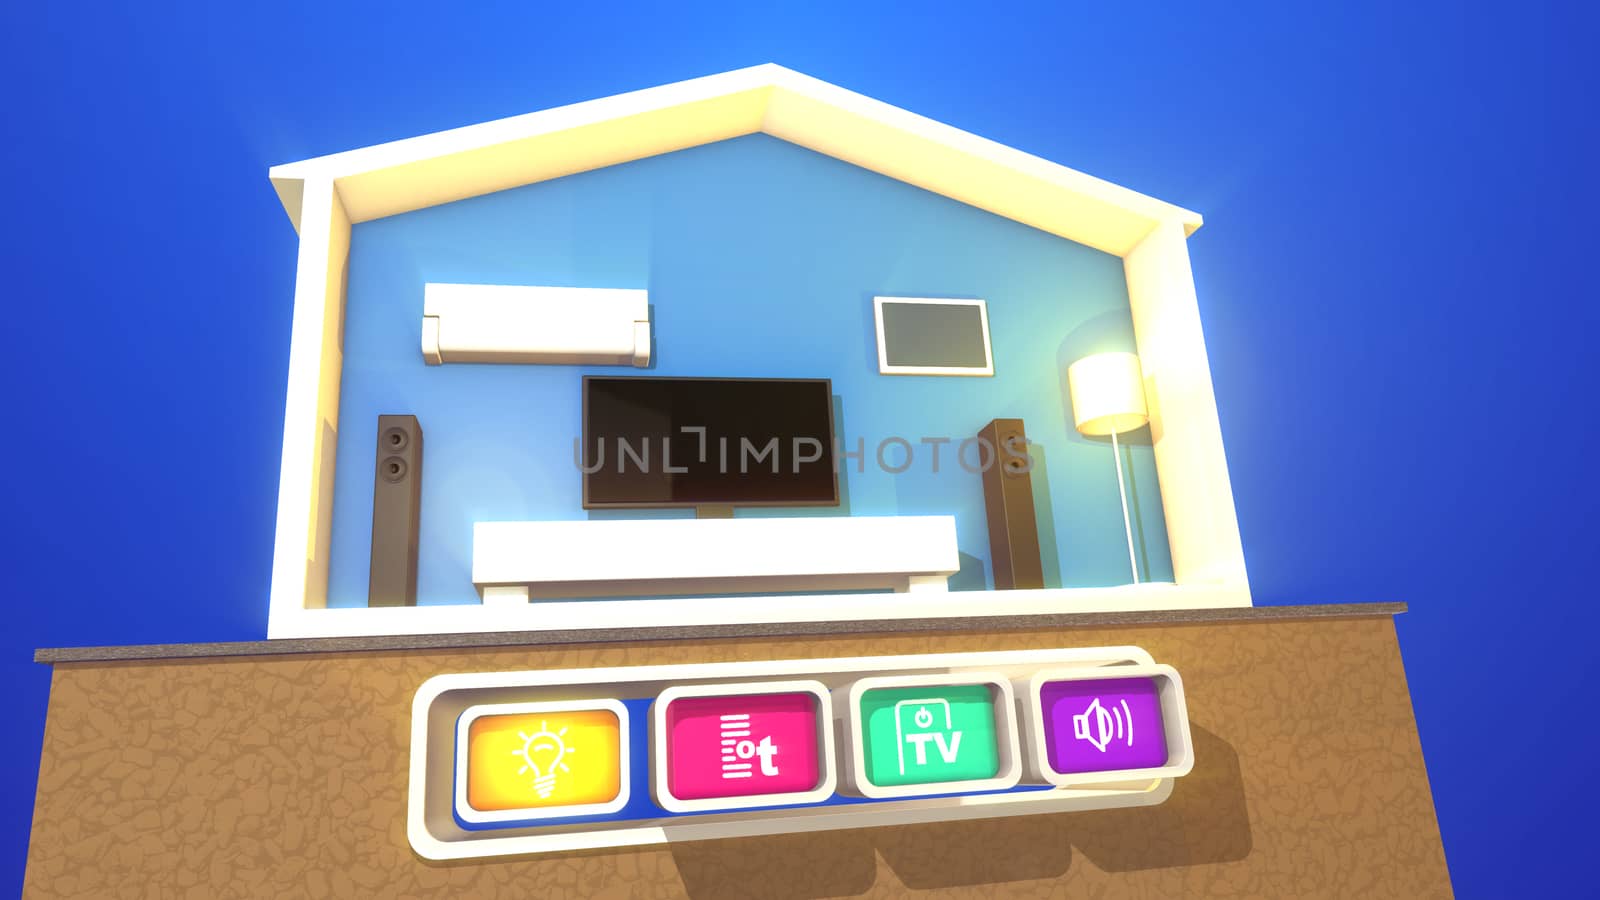 An optimistic 3d illustration of switching smart home section with a plasma TV, big rectangular speakers,  floor lamp, white wooden bed, air conditioner  and four buttons with some symbols.